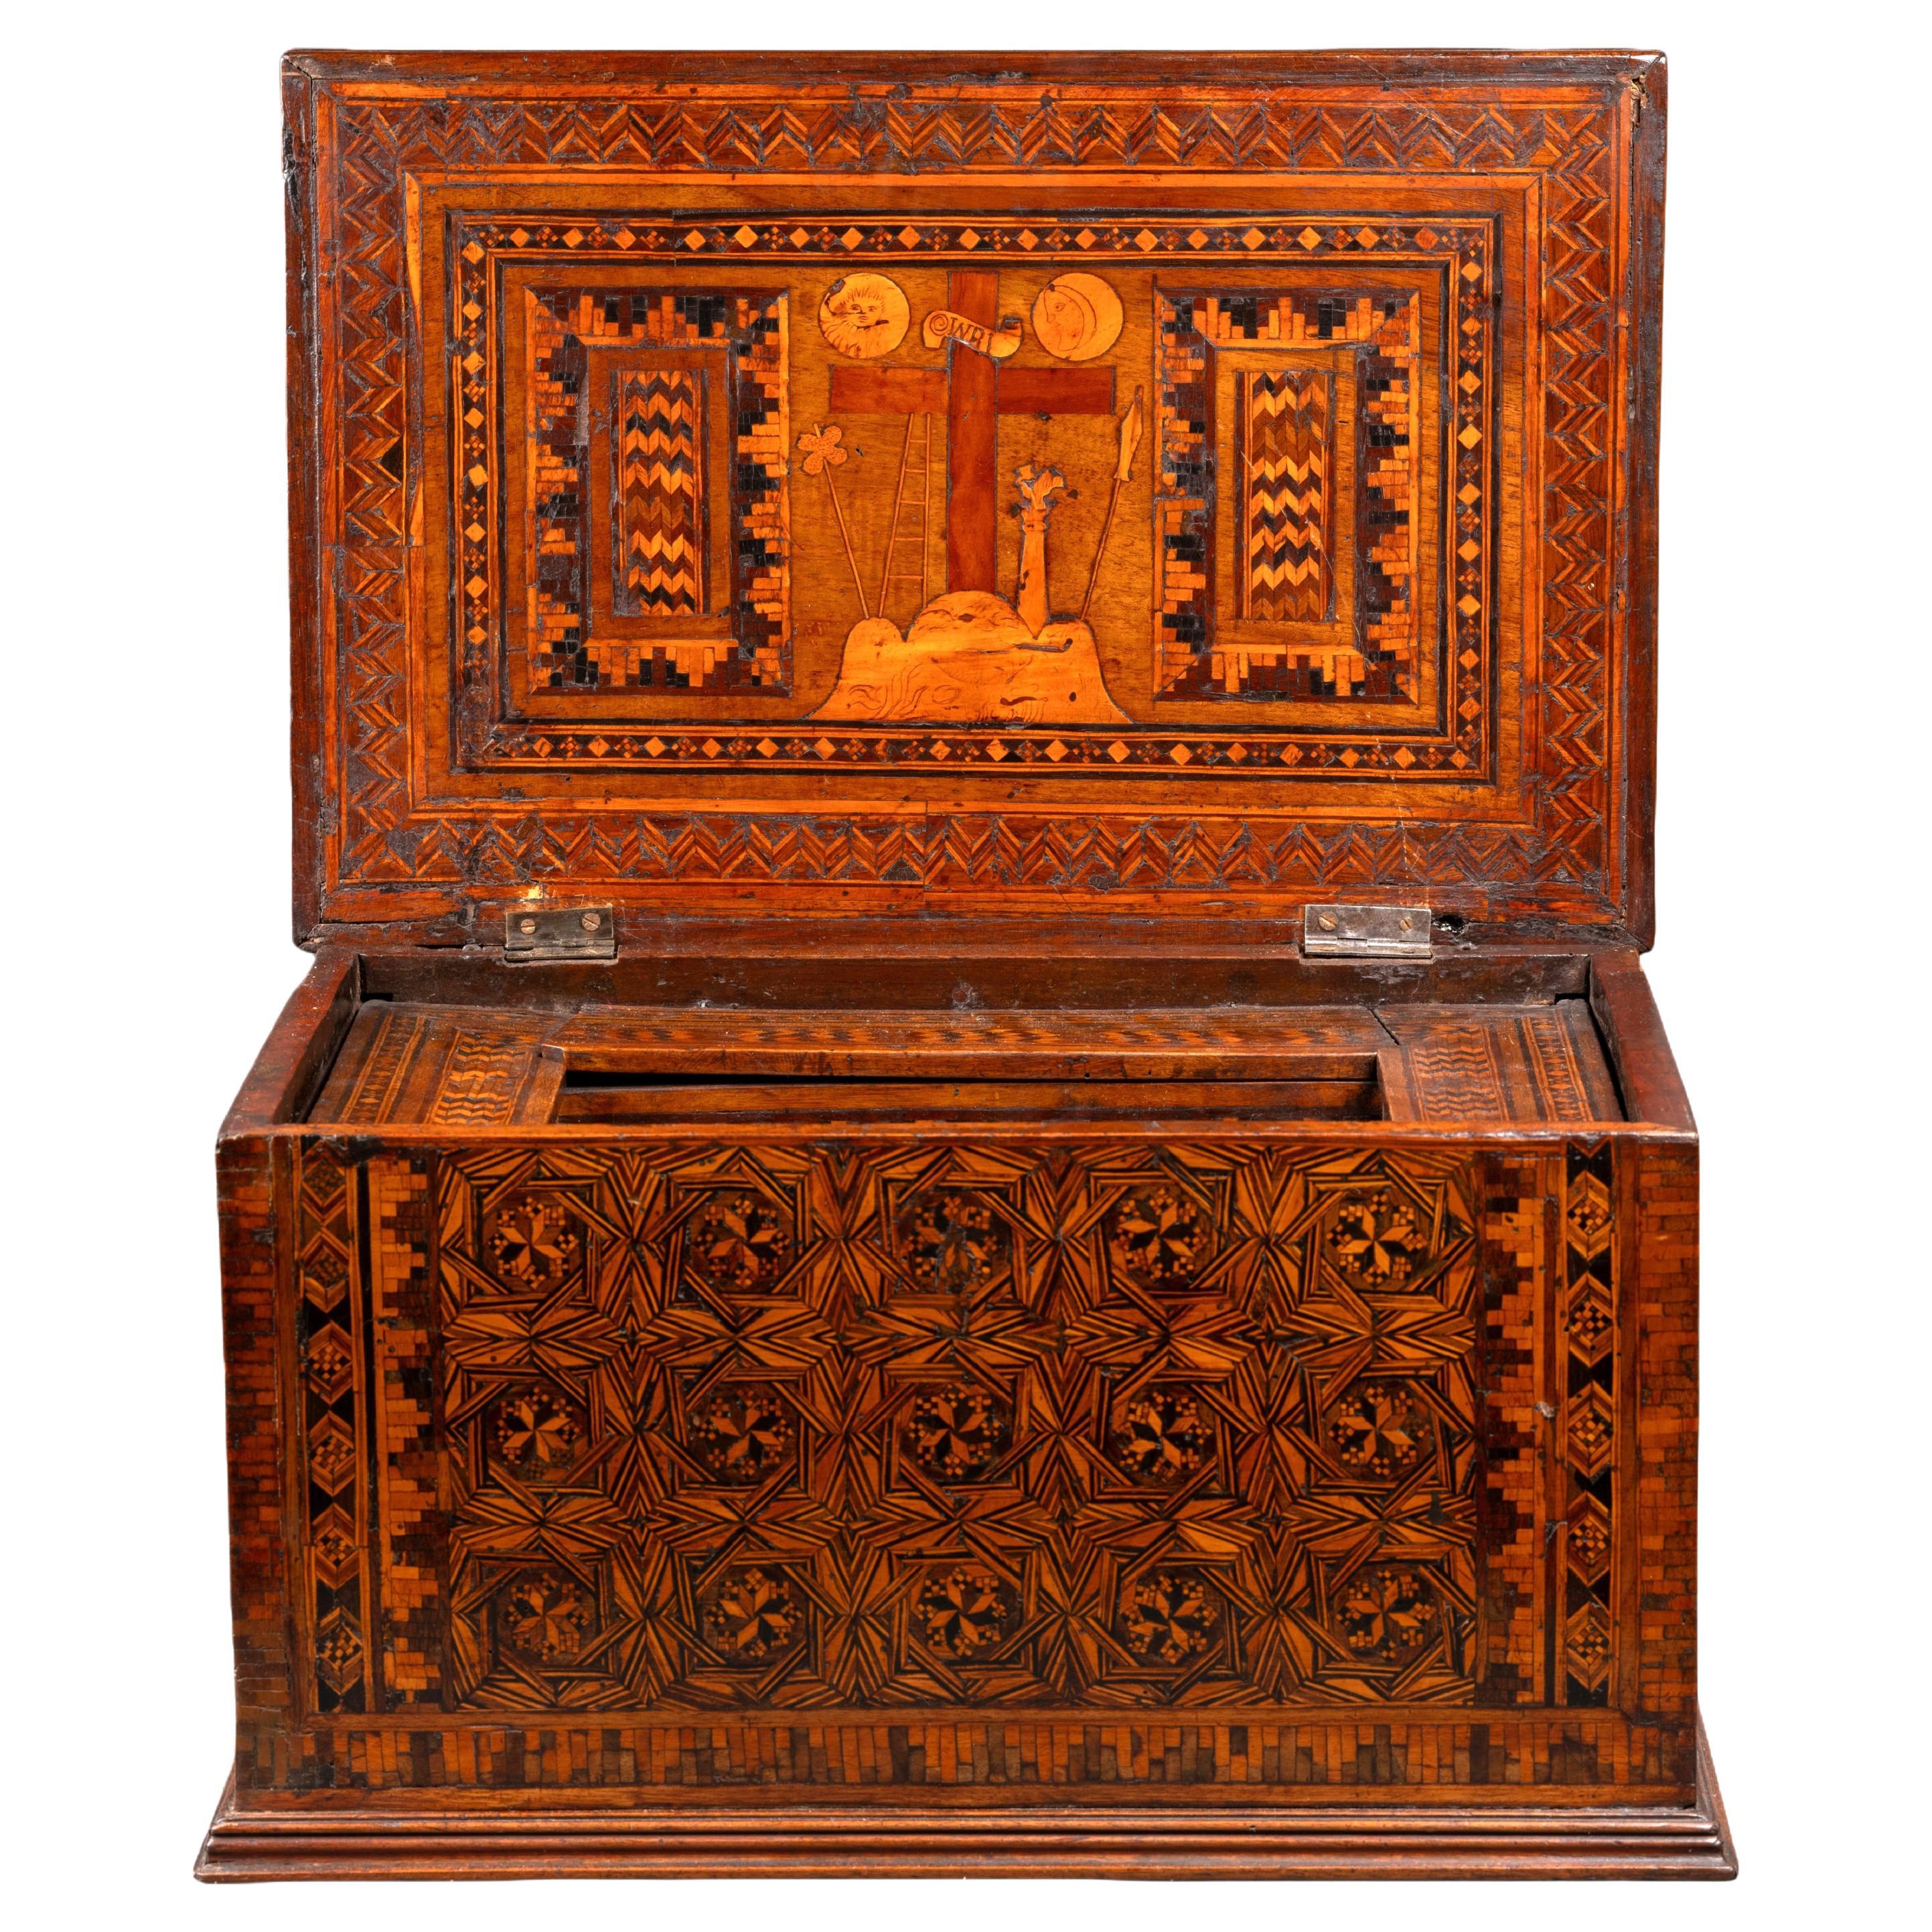 A late 15th century  wood inlaid writing casket, Florence, Italy